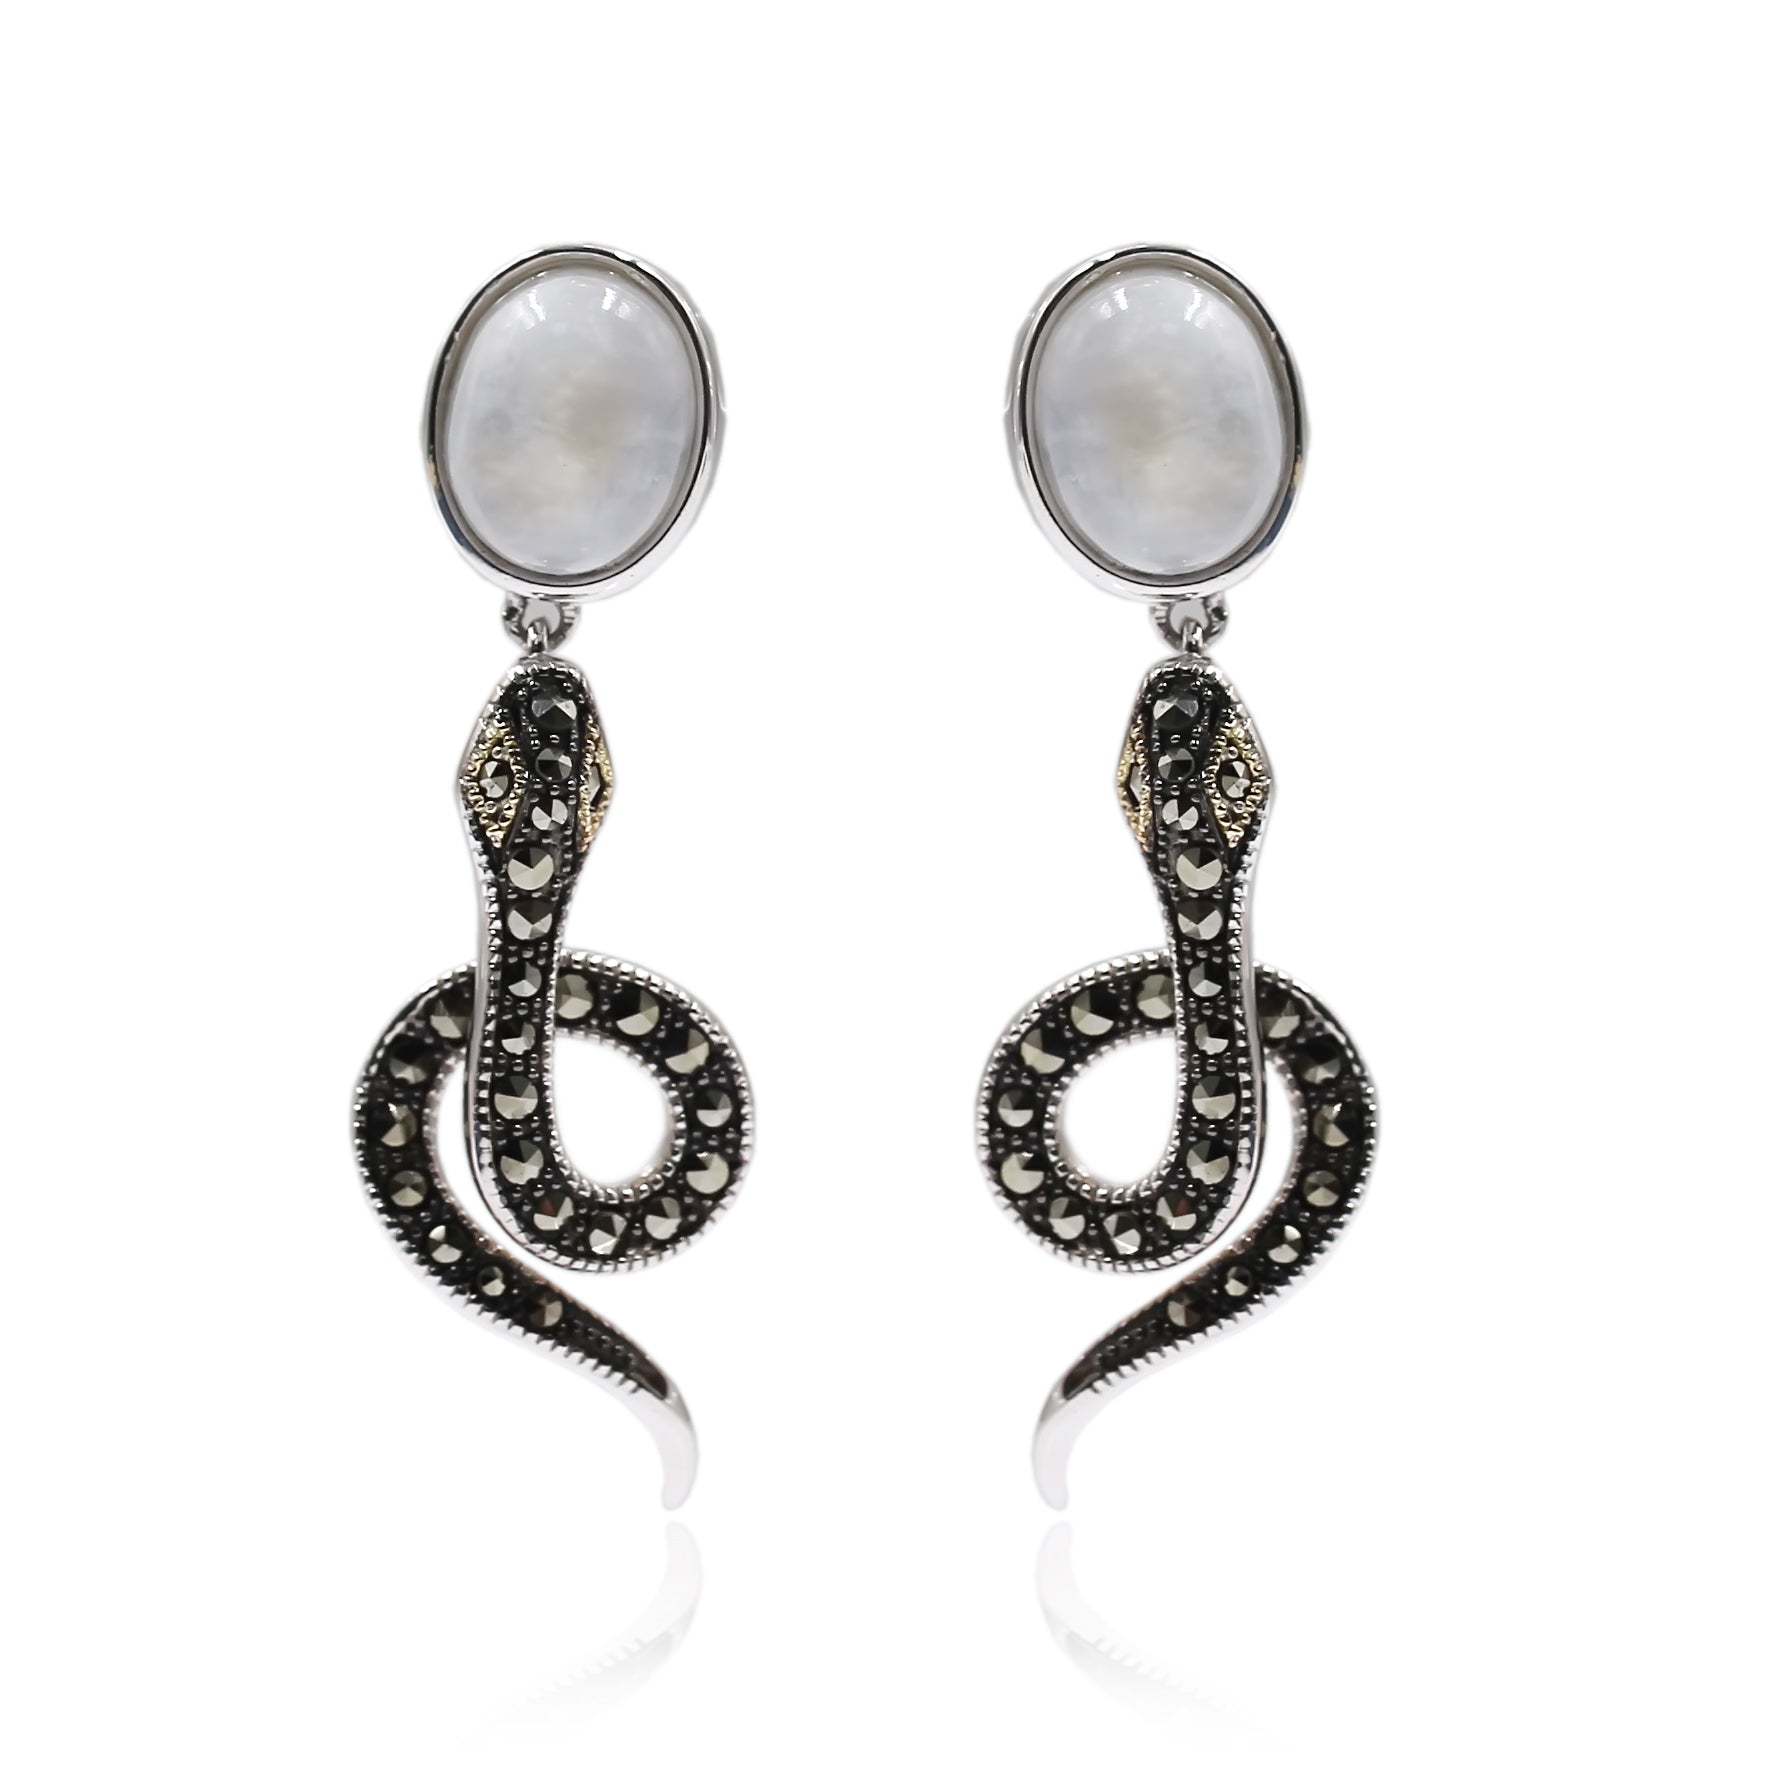 14K Gold & Strling Sillver With Moonstone, Marcasite Earrings